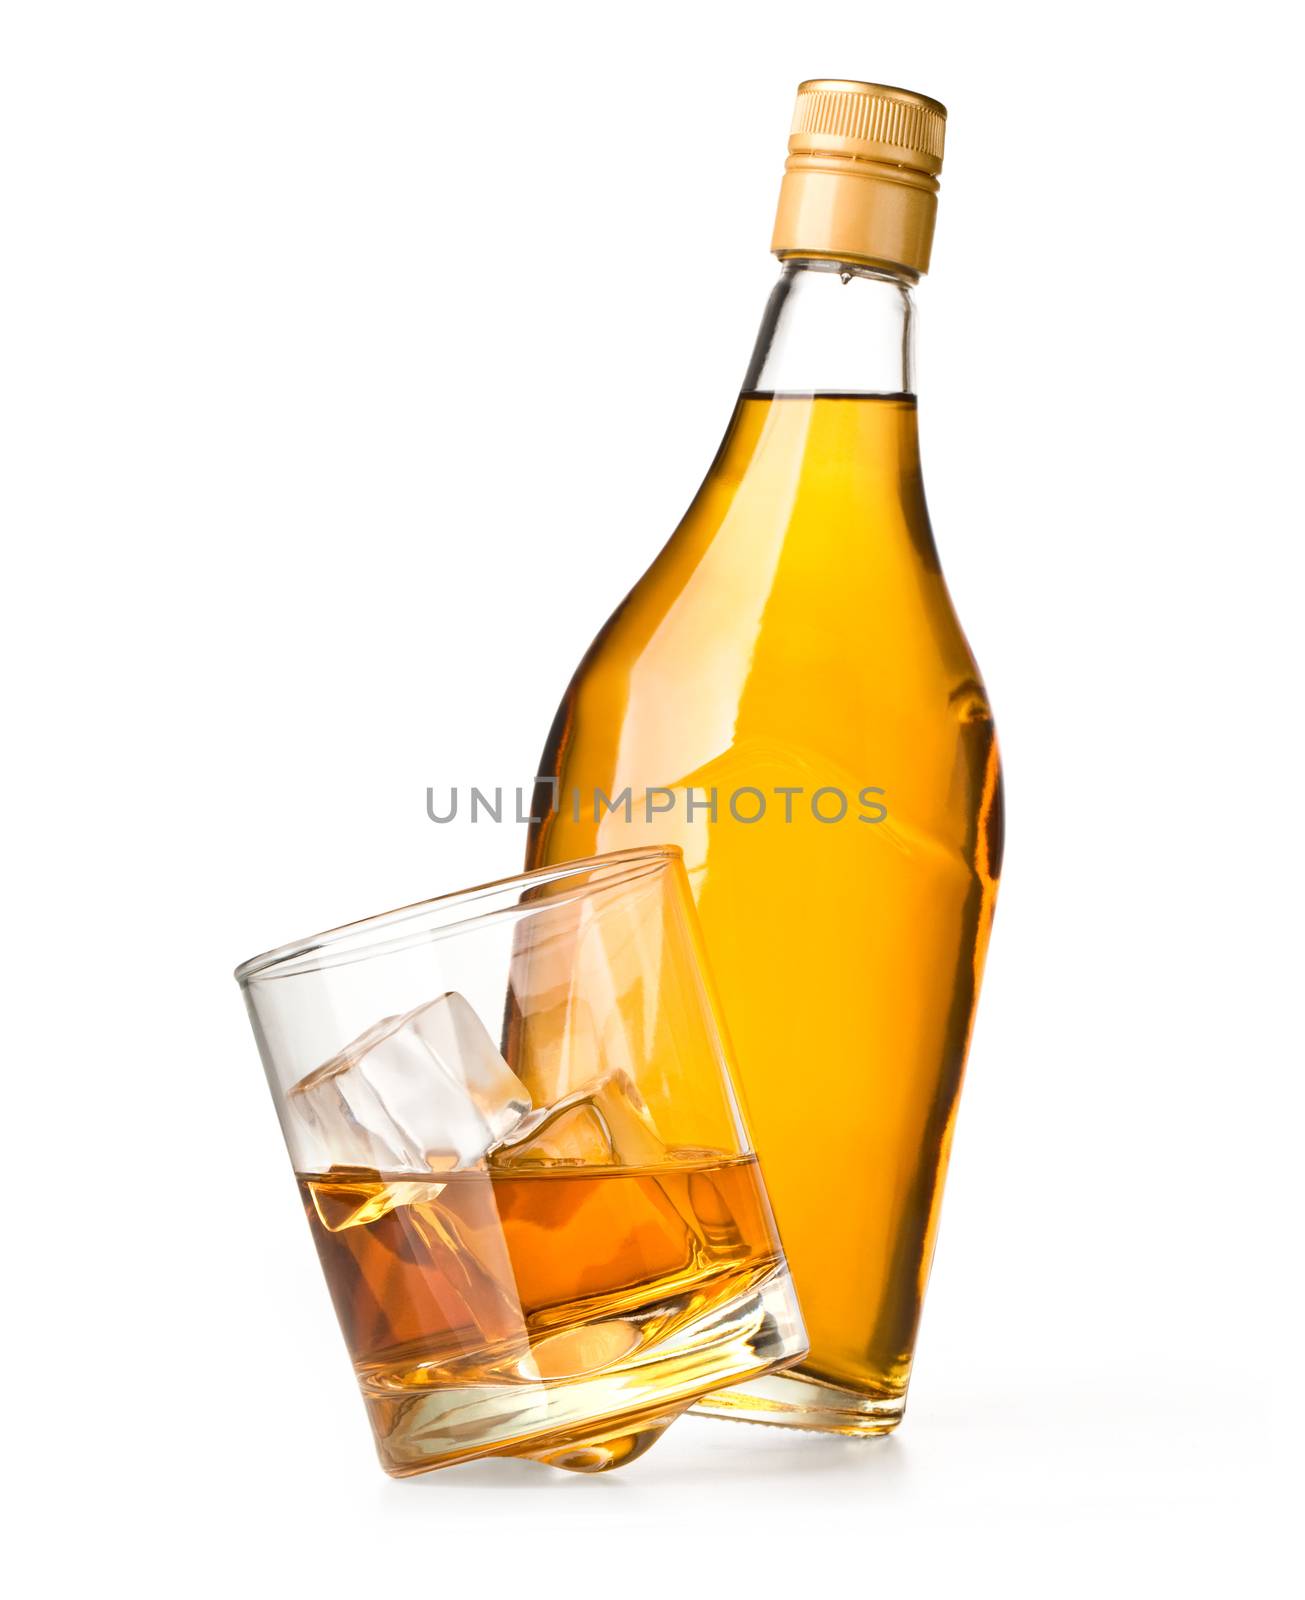 glass and bottle of whiskey on a white background